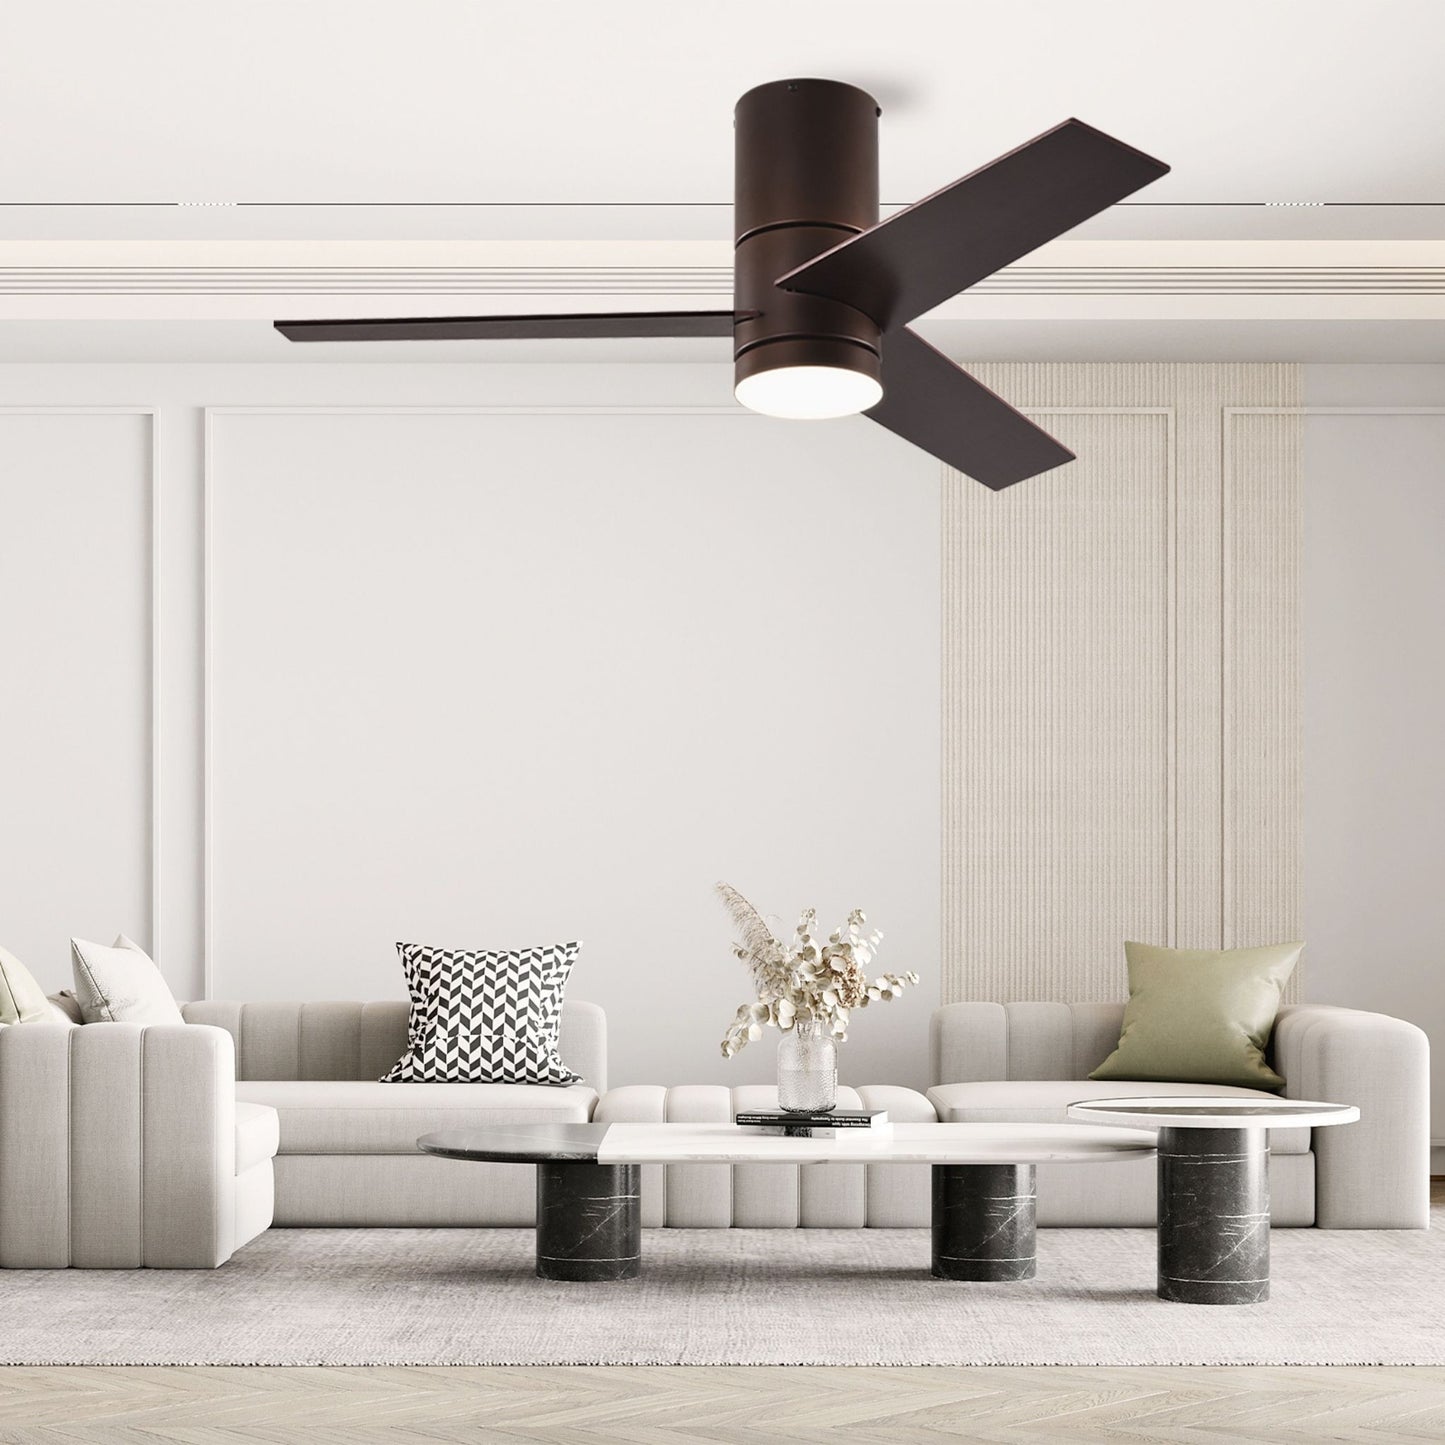 42" Dark Brown Propeller Three Blade Dimmable Remote Control Integrated Light Ceiling Fan